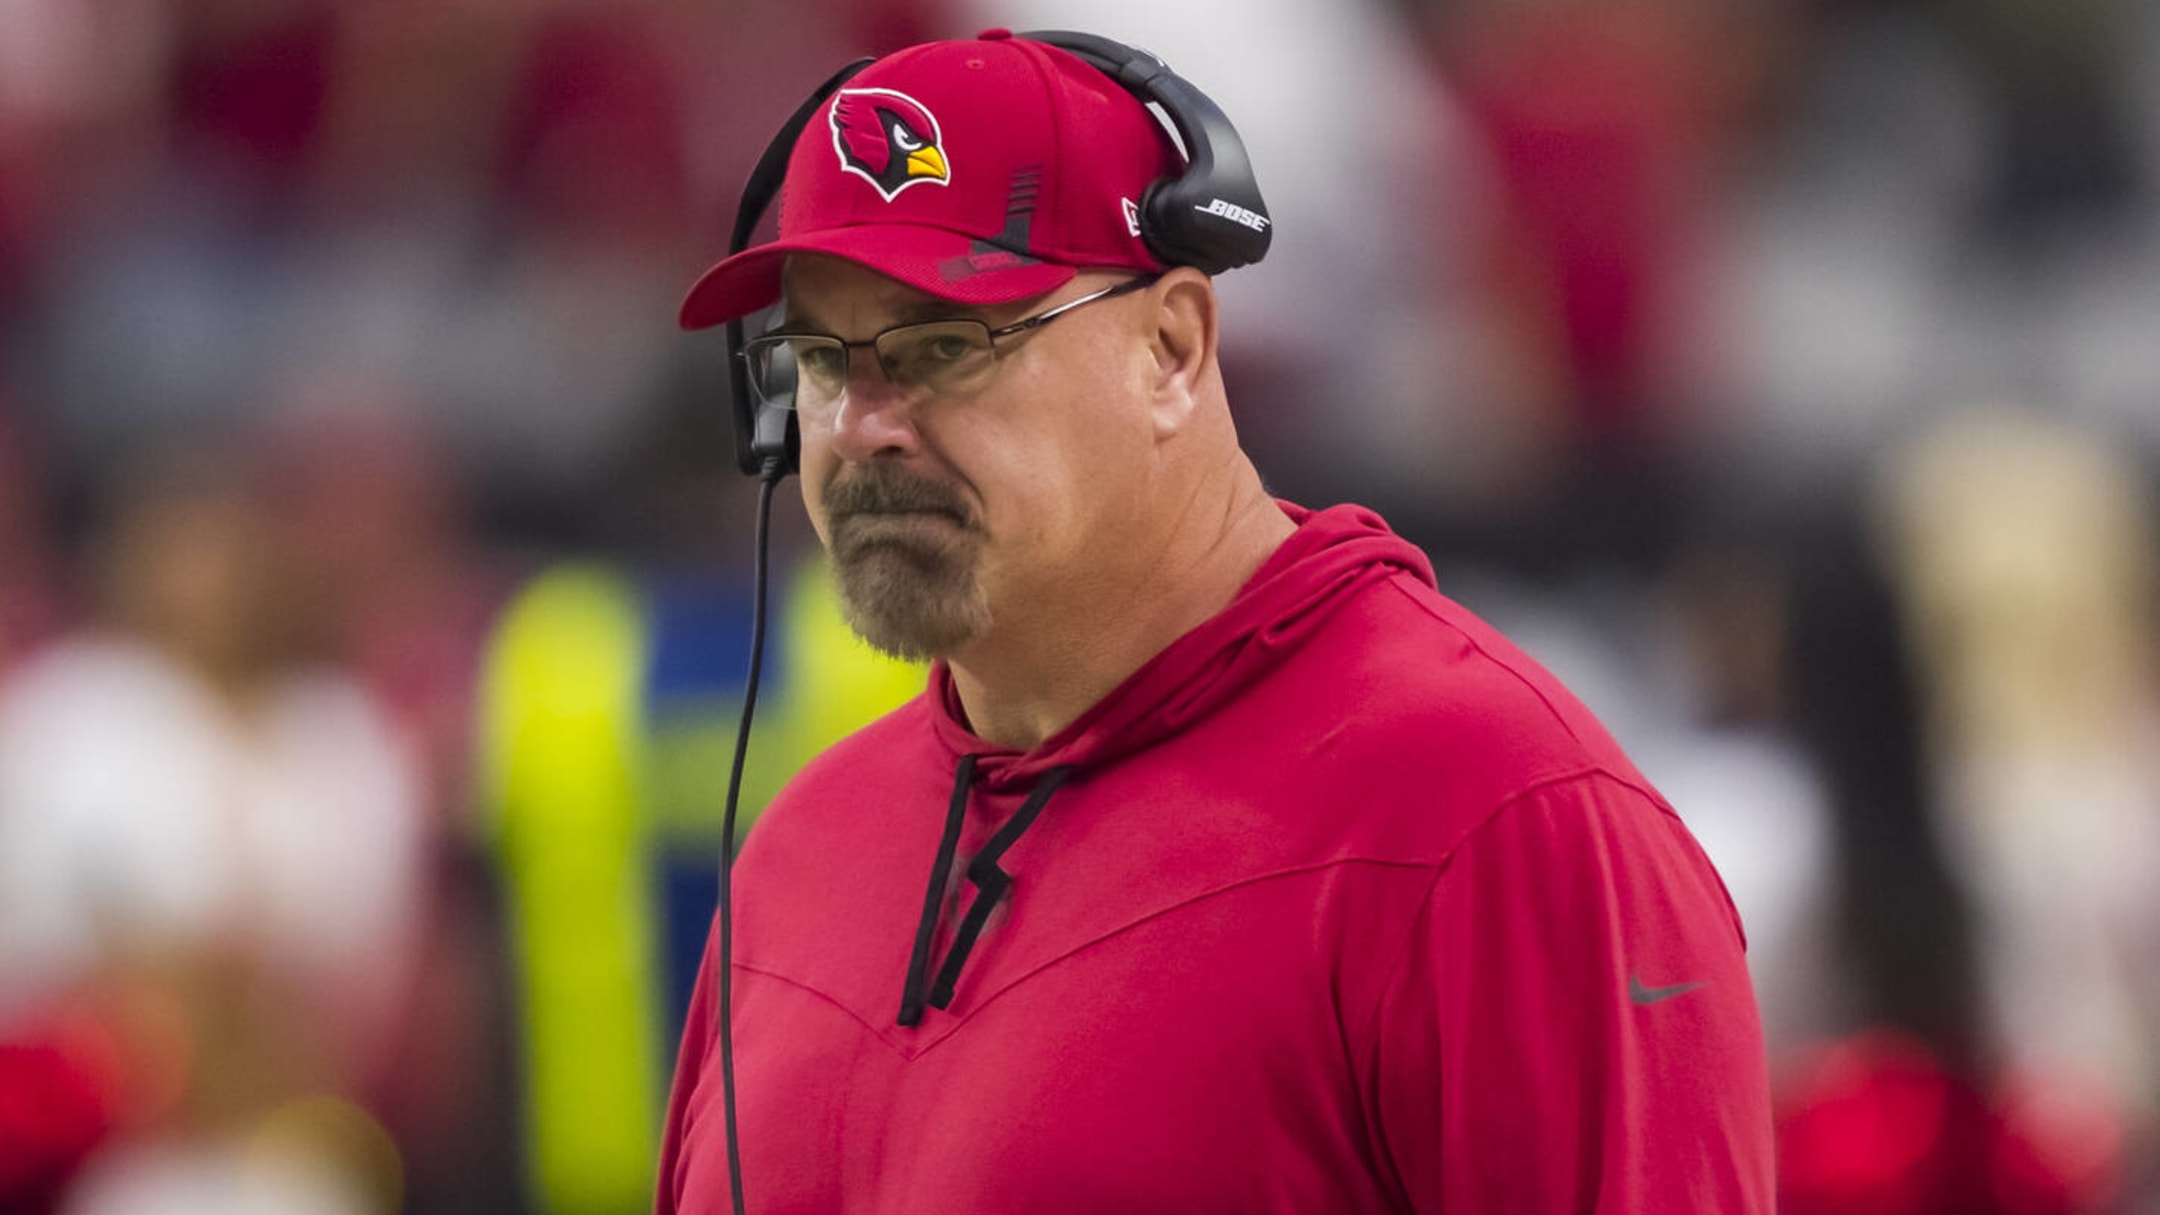 Cardinals reportedly fire coach following 'incident' in Mexico City |  Yardbarker